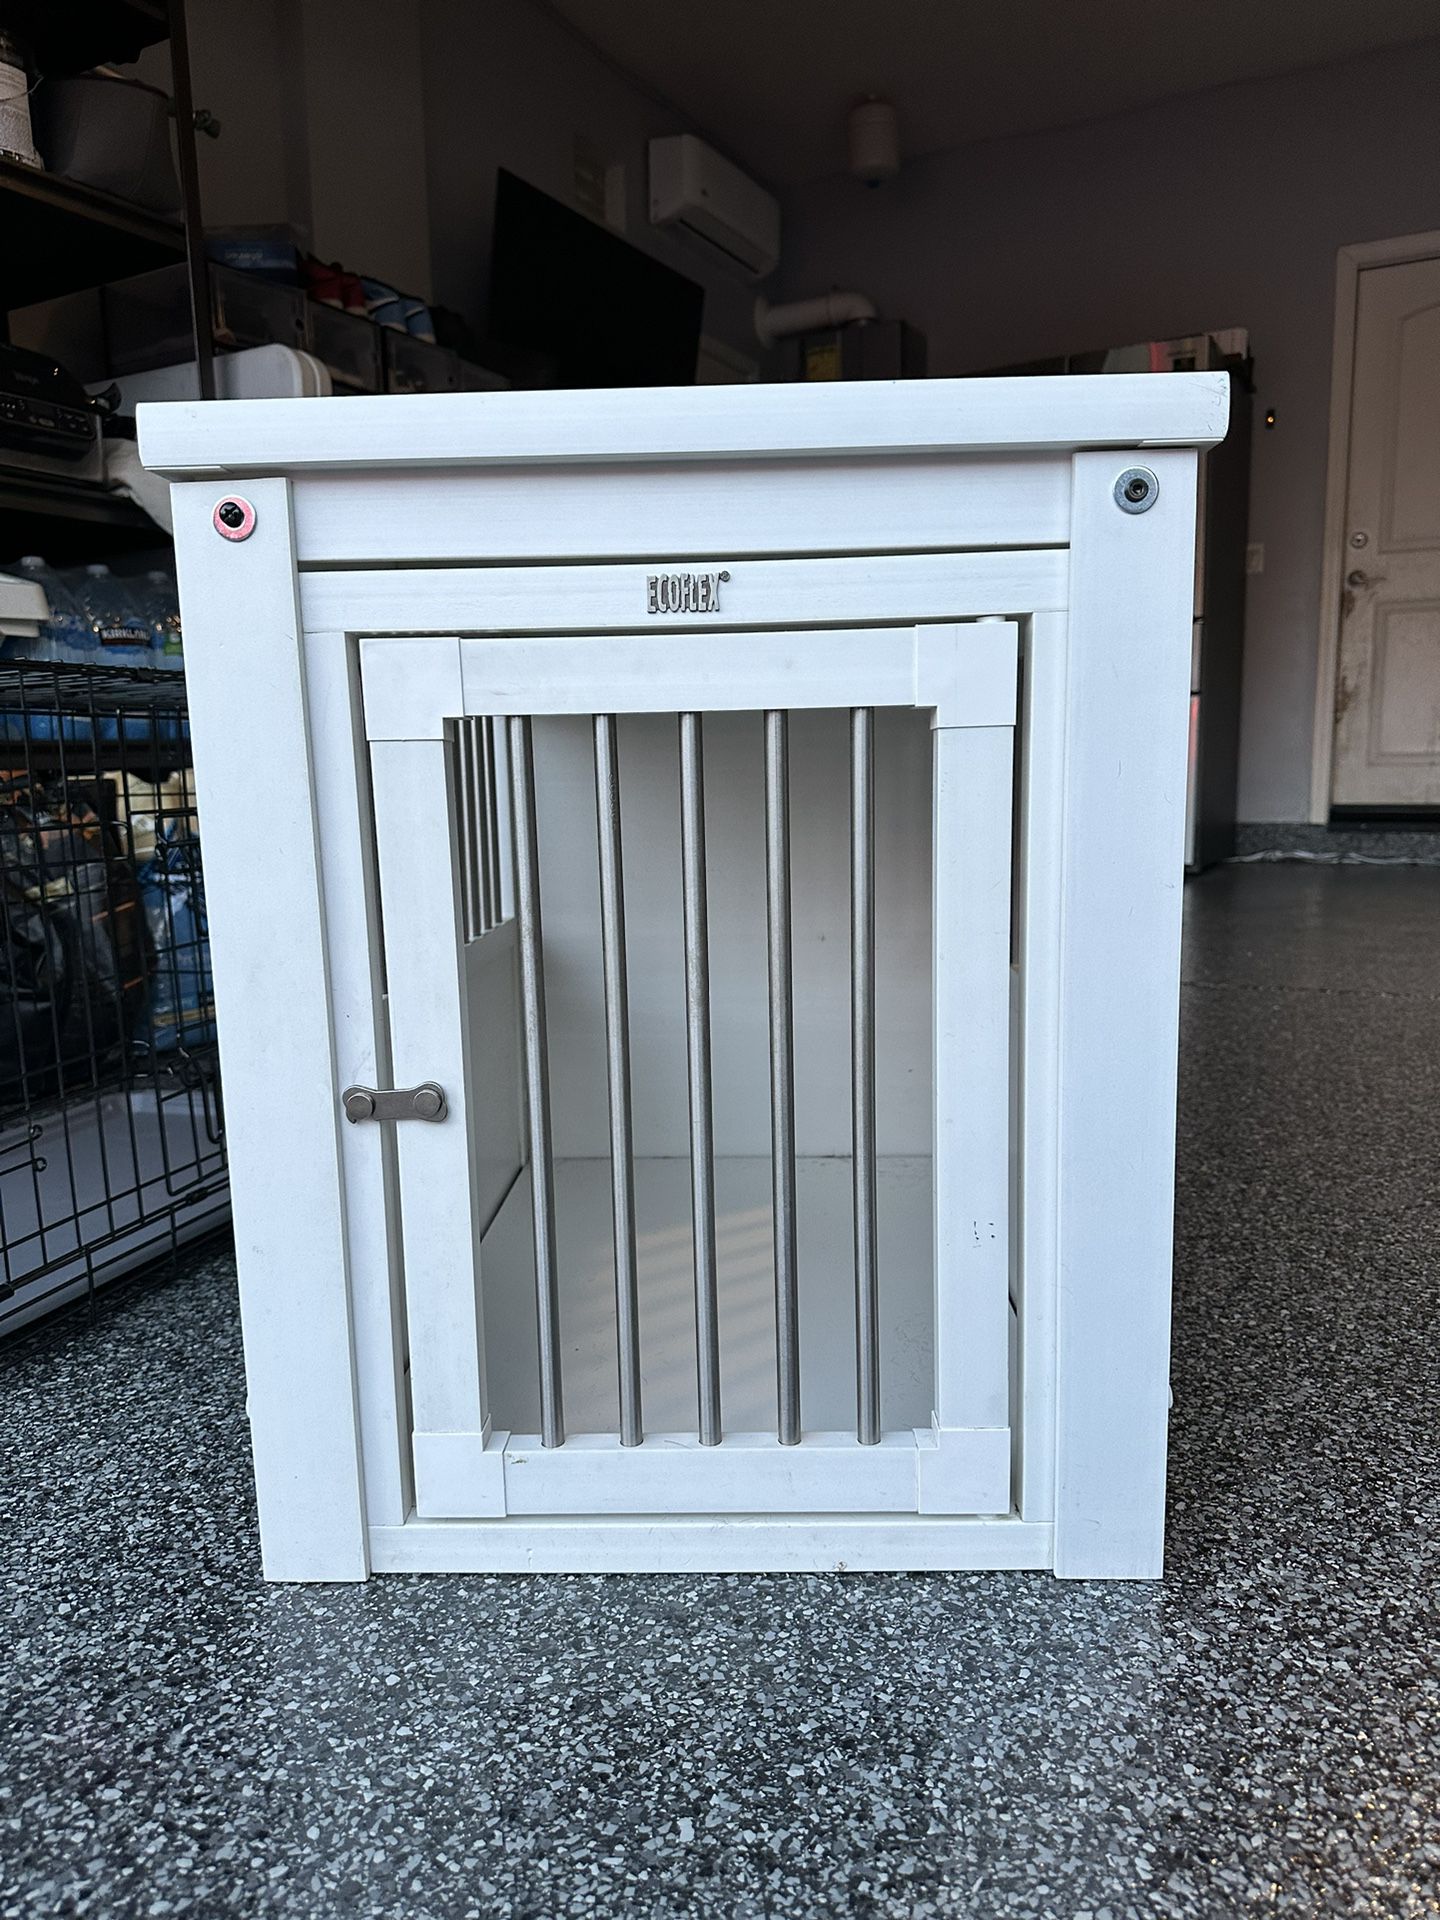 Medium Sized Dog Crate. New Age Pet ecoFLEX Single Door Furniture Style Dog Crate & End Table